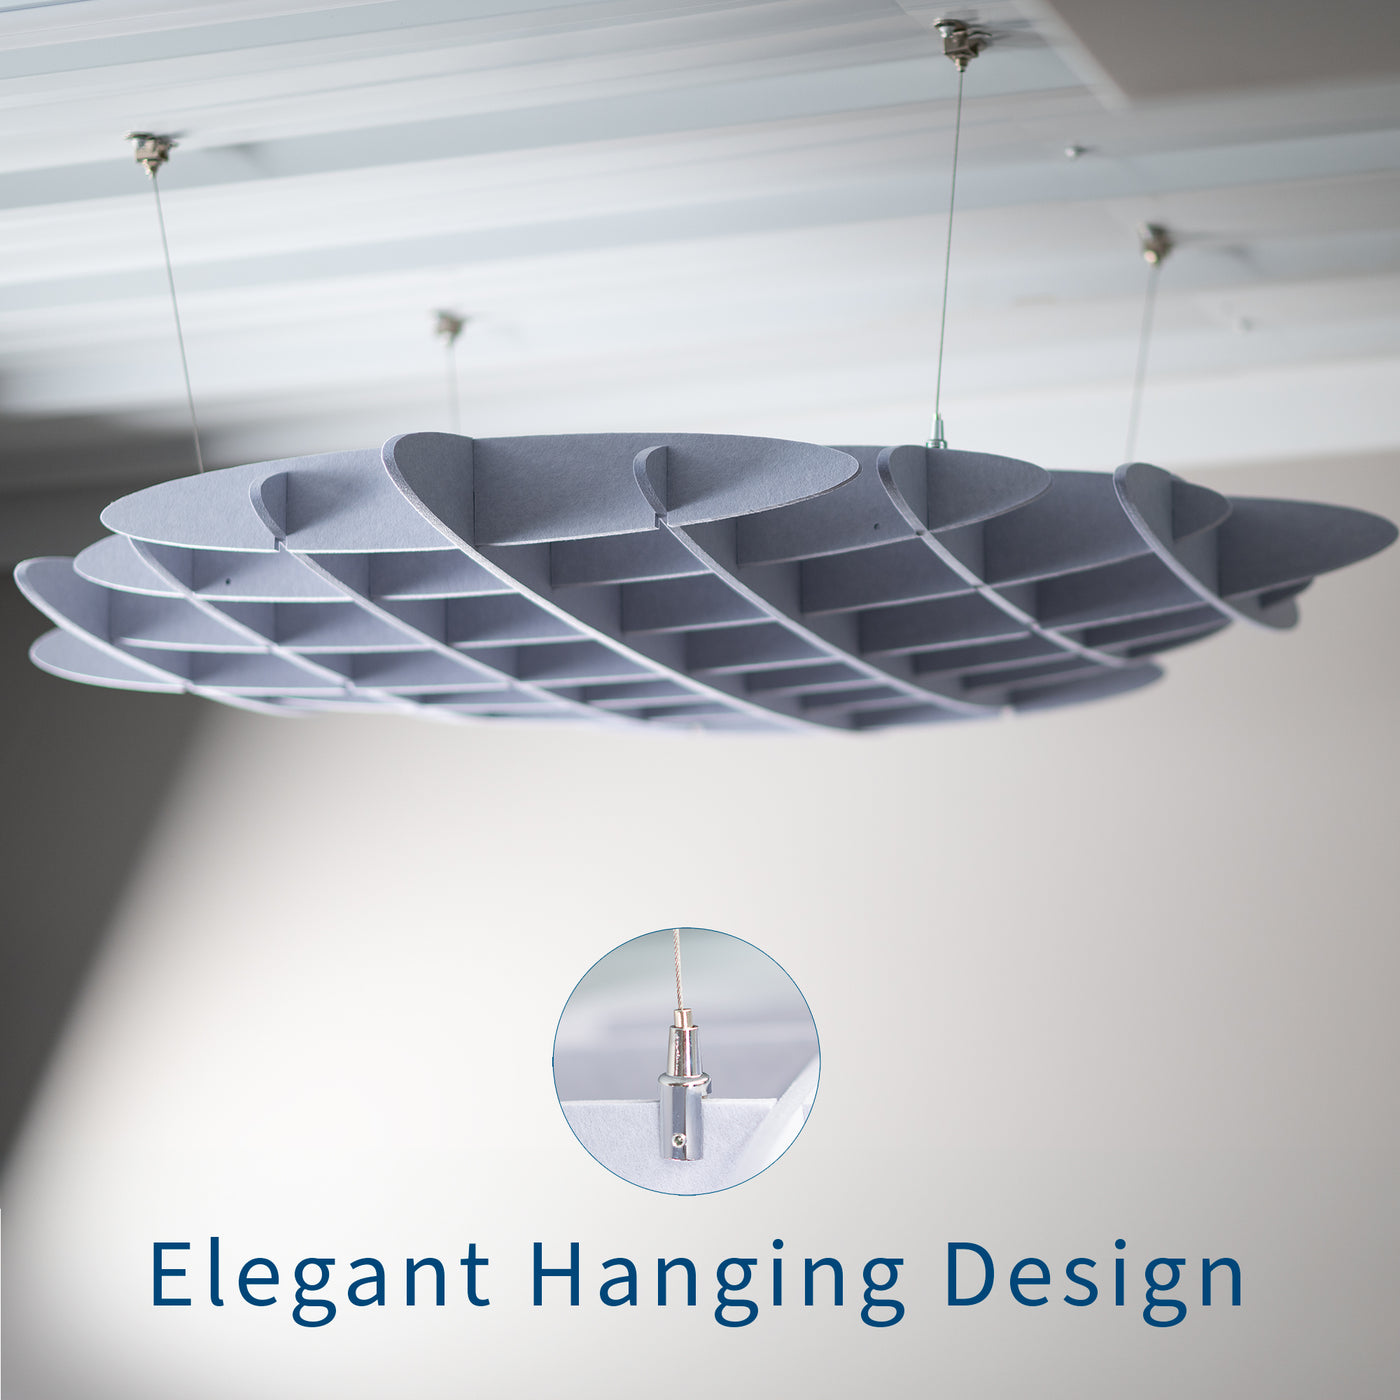 Sleek modern acoustic ceiling waffle panel with sturdy hanging wires for sound dampening.